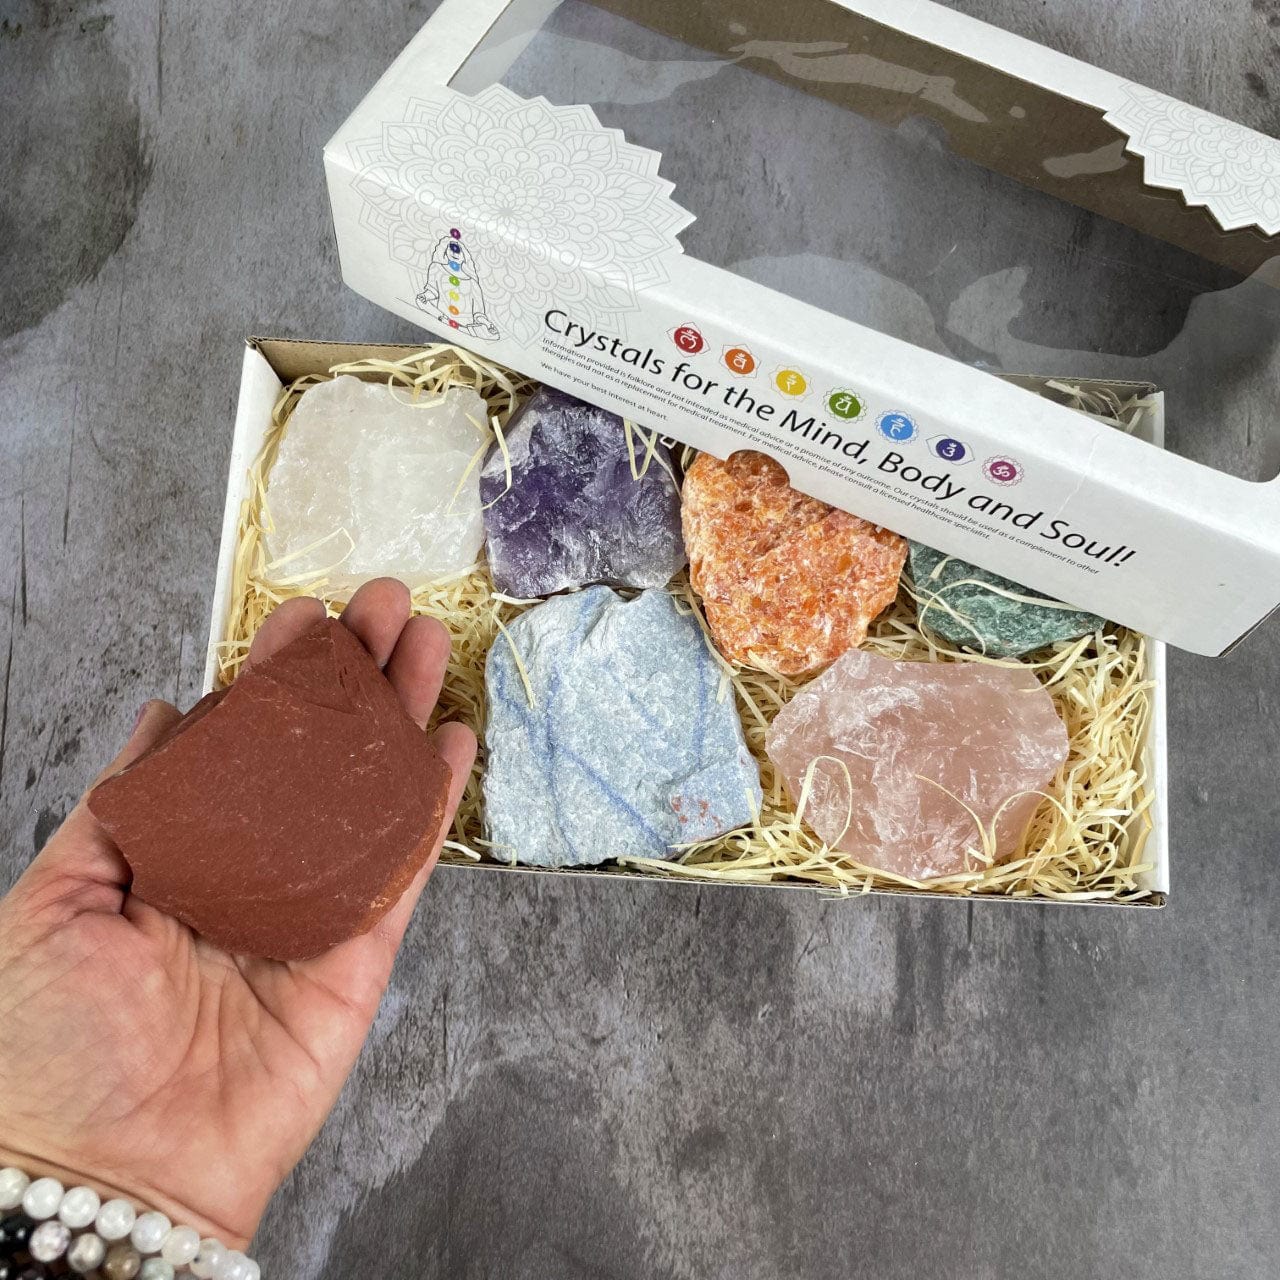 Chakra Rough Stone Set of 7 - Boxed Collection (RS-15)